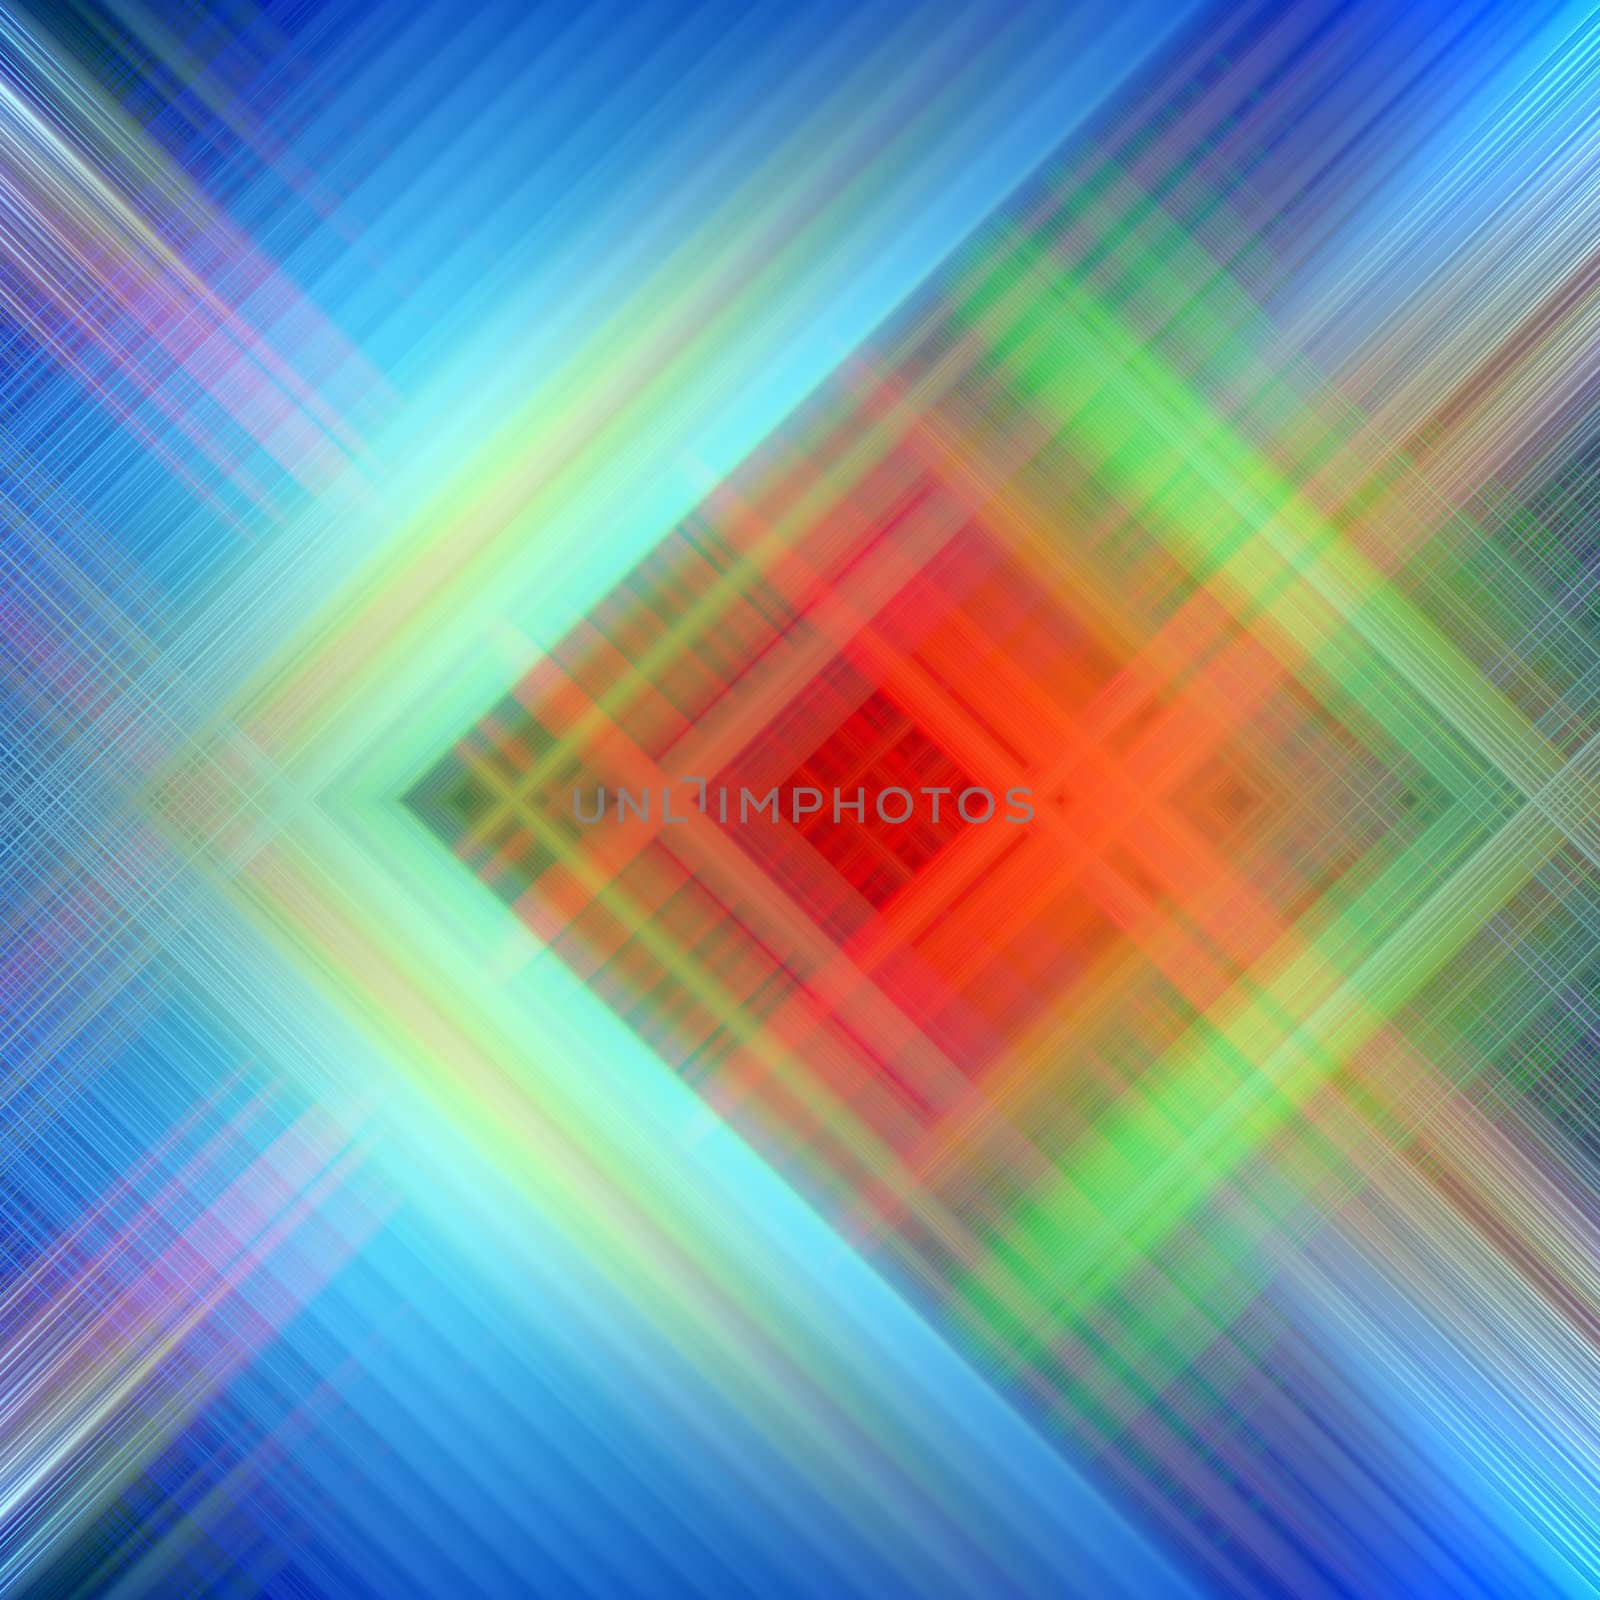 Abstract background of colorful diagonal lines. High resolution image